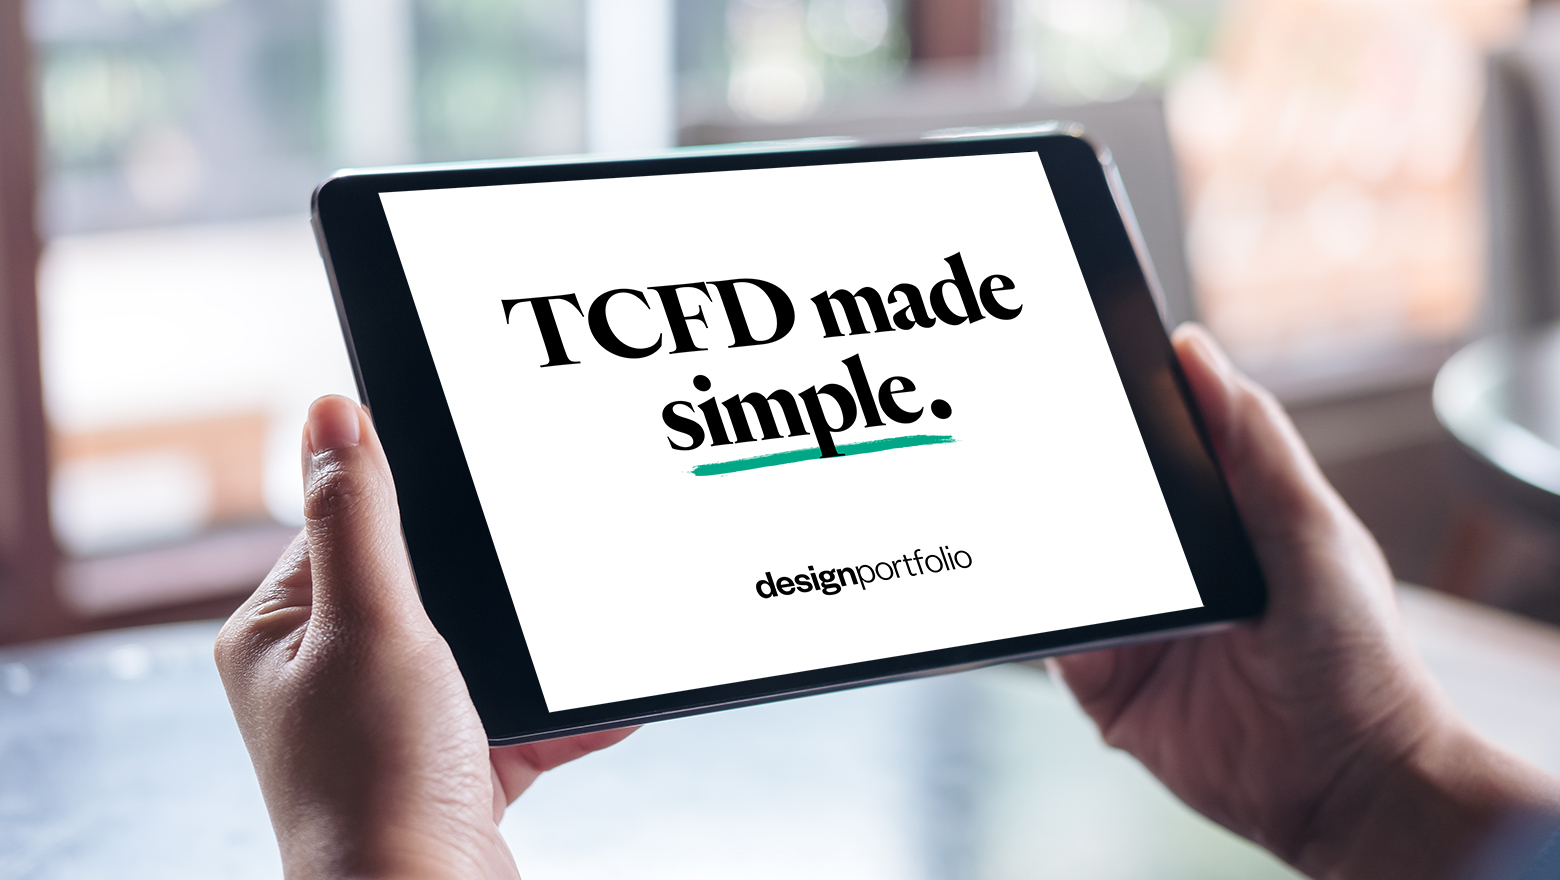 TCFD made simple.